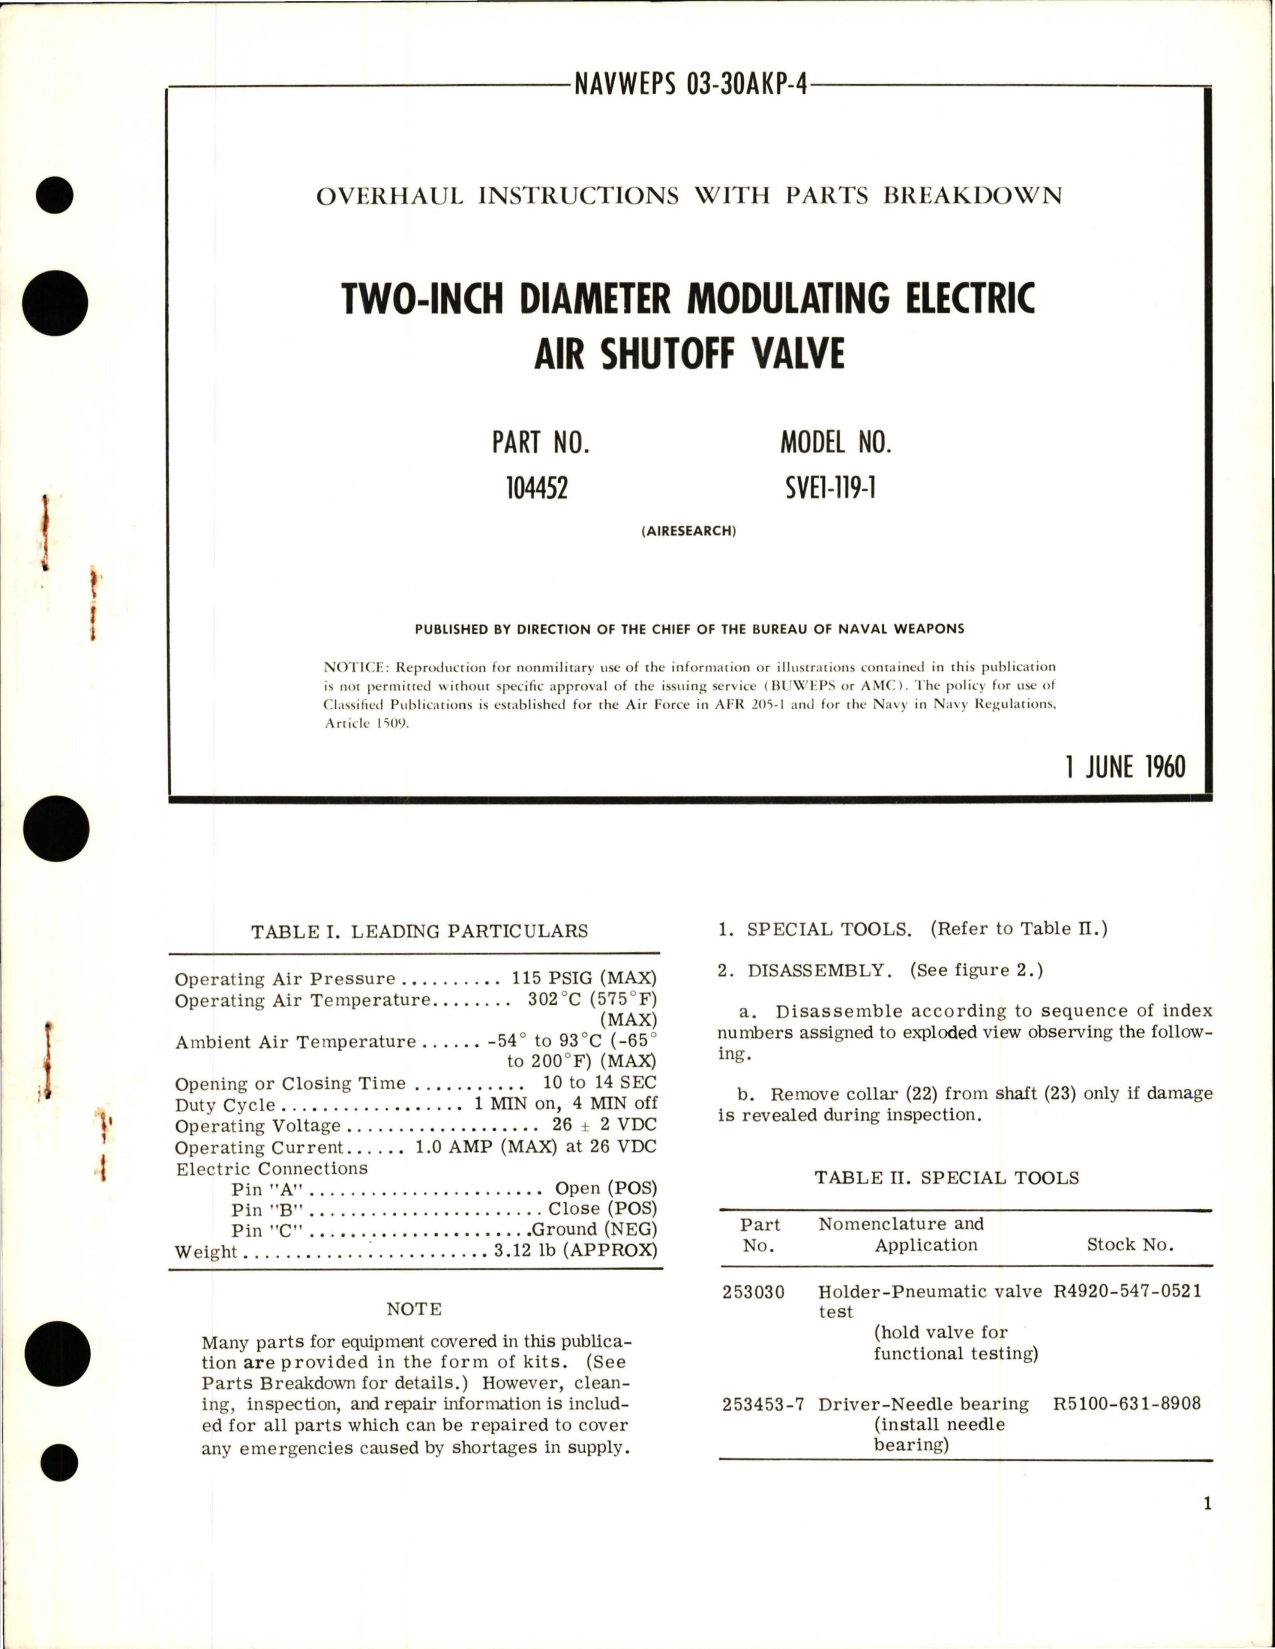 Sample page 1 from AirCorps Library document: Overhaul Instructions with Parts Breakdown for Modulating Electric Air Shutoff Valve - Two Inch Diameter - Part 104452 - Model SVE1-119-1